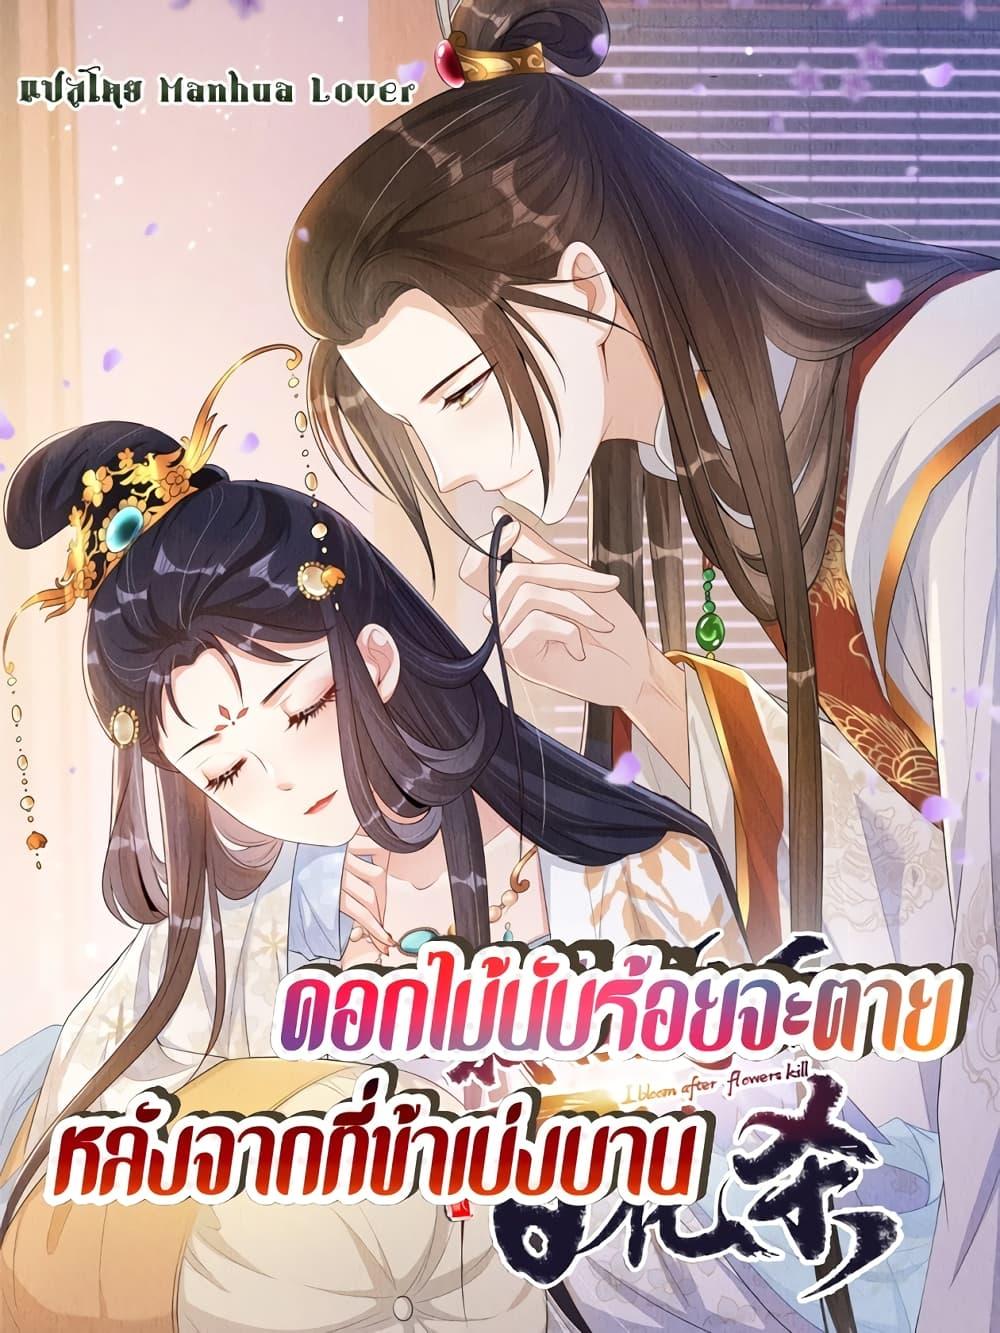 After I Bloom, a Hundred Flowers Will ill – ดอกไม้นับ ตอนที่ 53 (1)